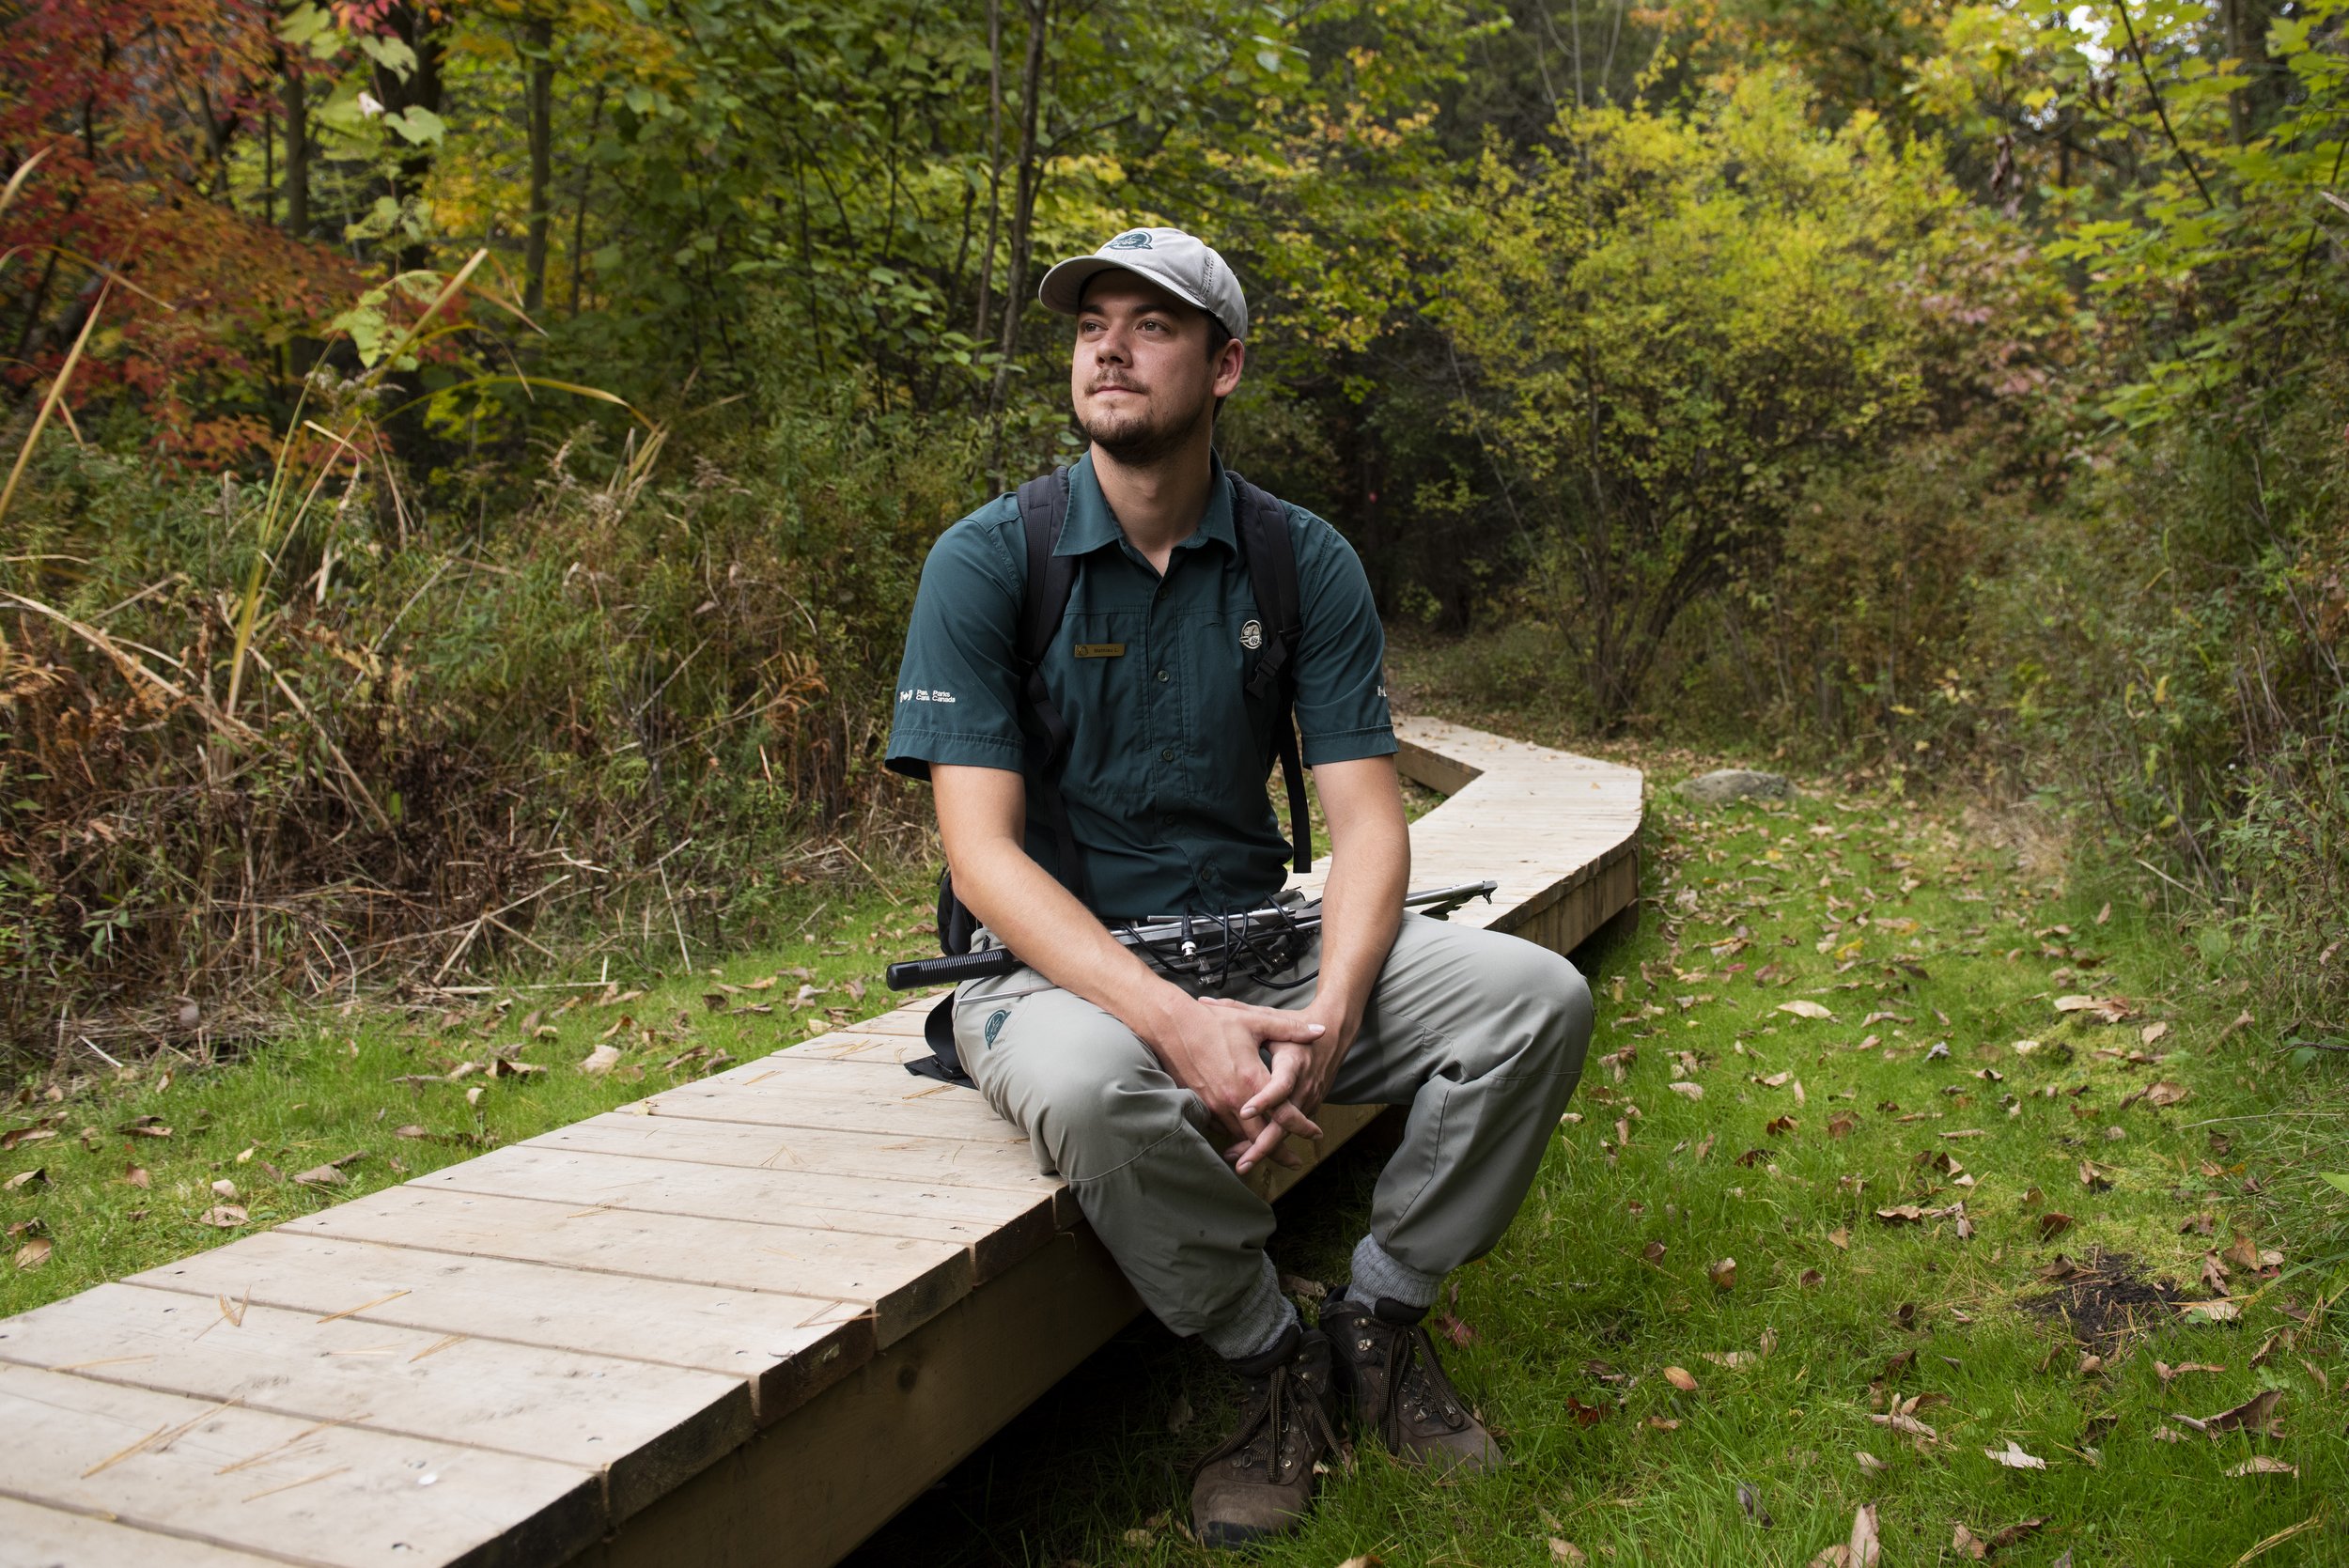  Mathieu Lecompte, a Resource Management Officer for Parks Canada on its Resource Conservation team is seen in a portrait at the Thousands Island National Park entrance near Mallorytown, Front of Yonge, Ont., on Wednesday, Oct. 12, 2022.   